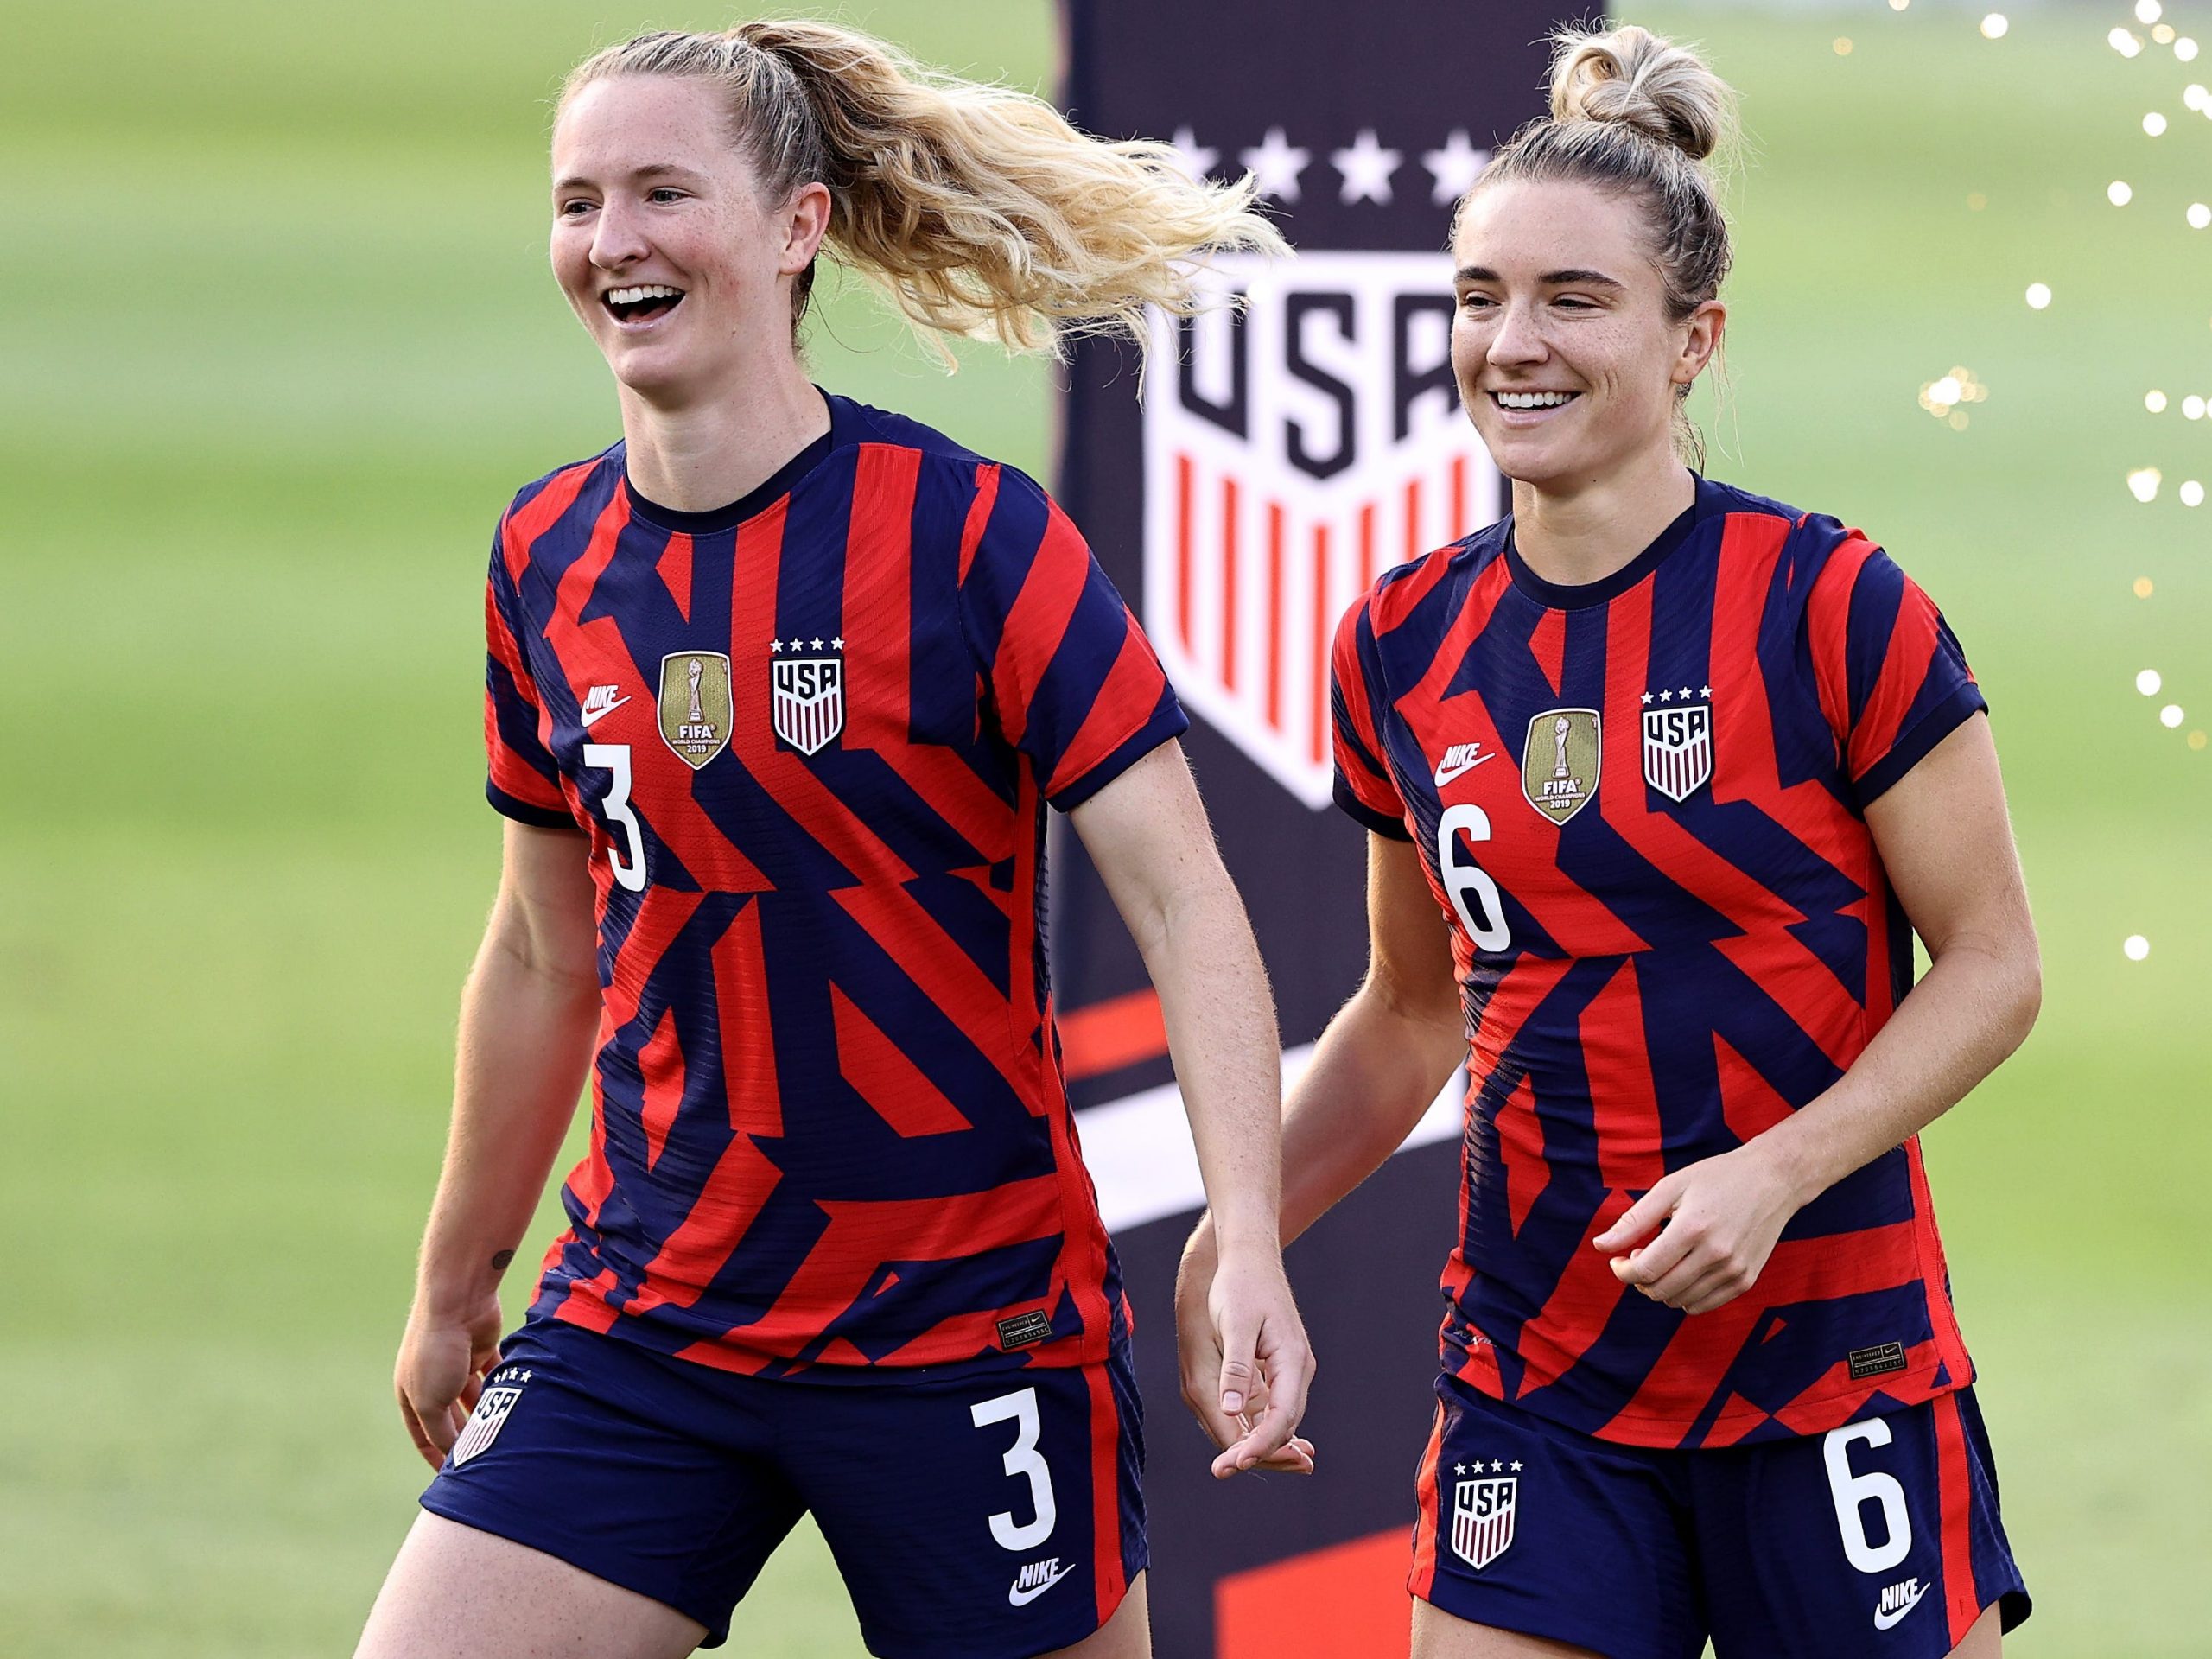 US Soccer sisters Sam and Kristie Mewis celebrated becoming Olympians in  'Masshole' style - brewing their own beer